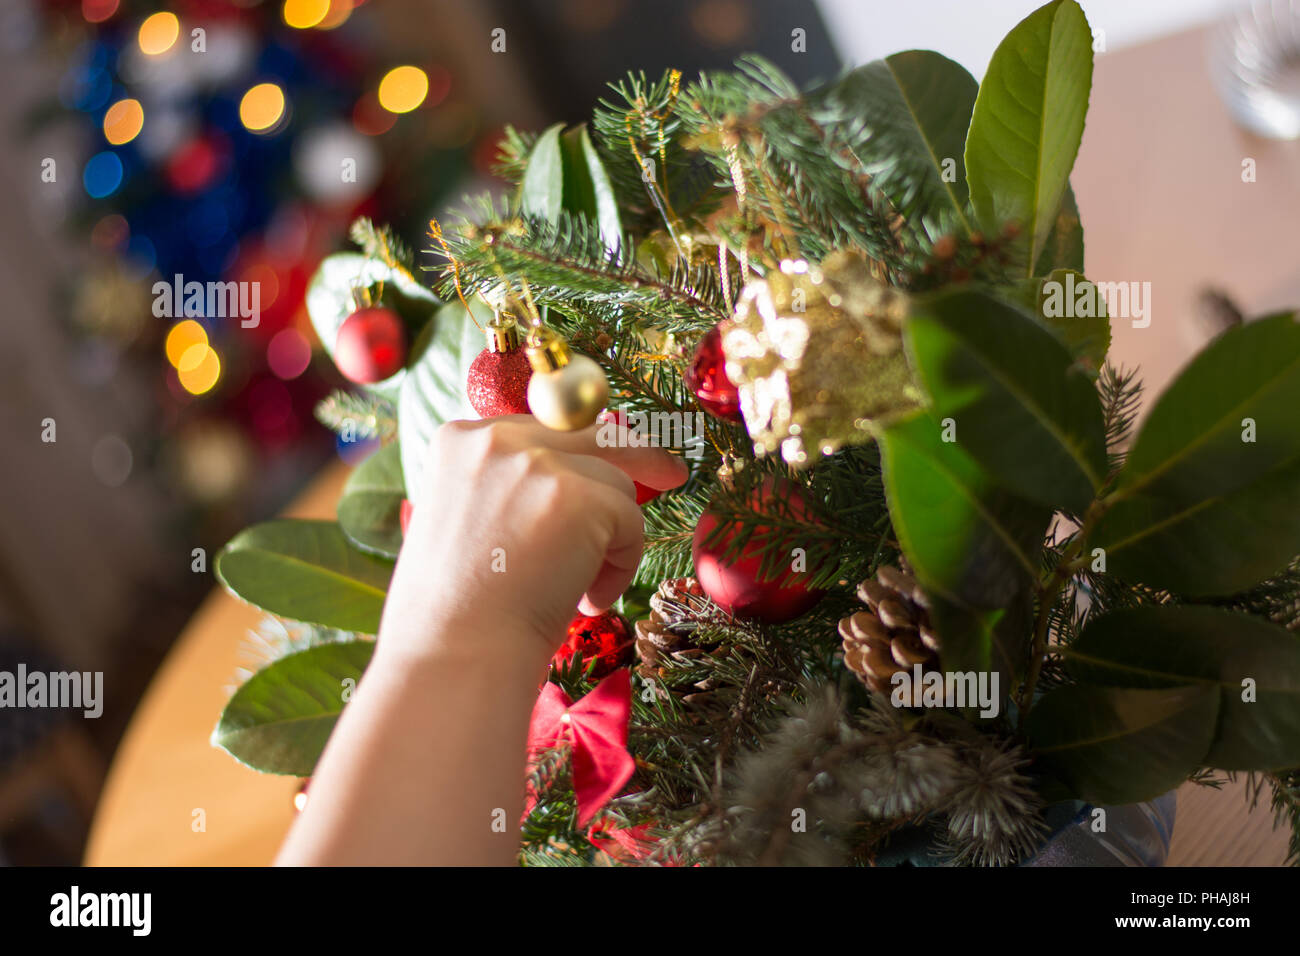 Decorating Christmass bouqet  with red ornaments and tree branches Stock Photo